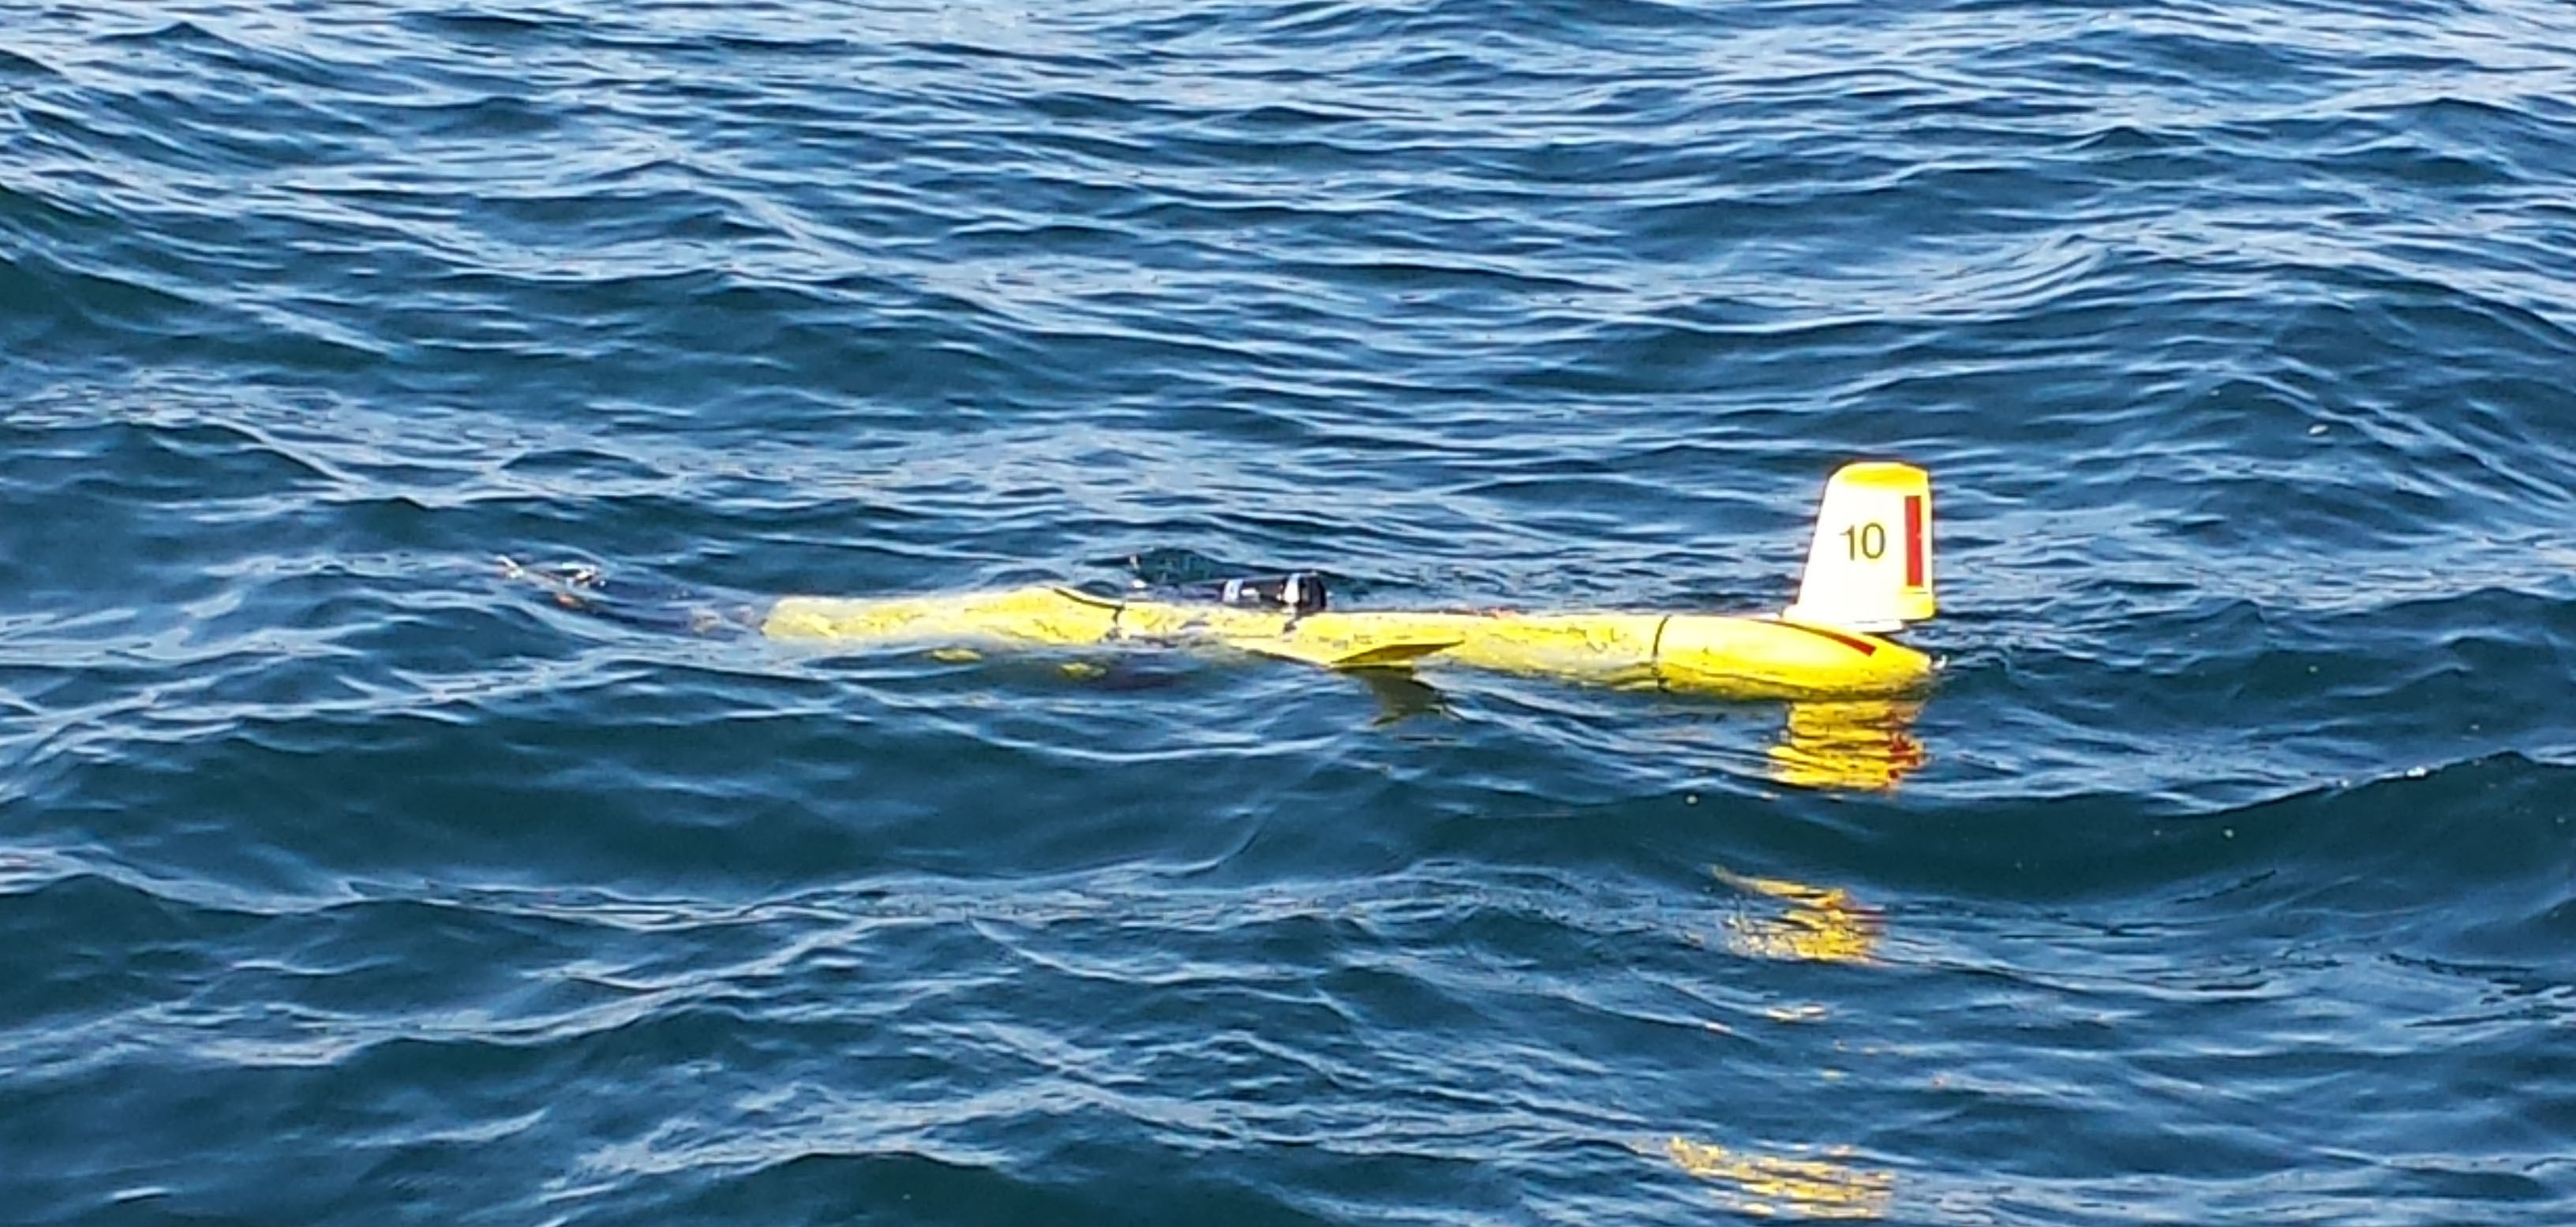 Autonomous underwater vehicles like this glider can monitor underwater noise.